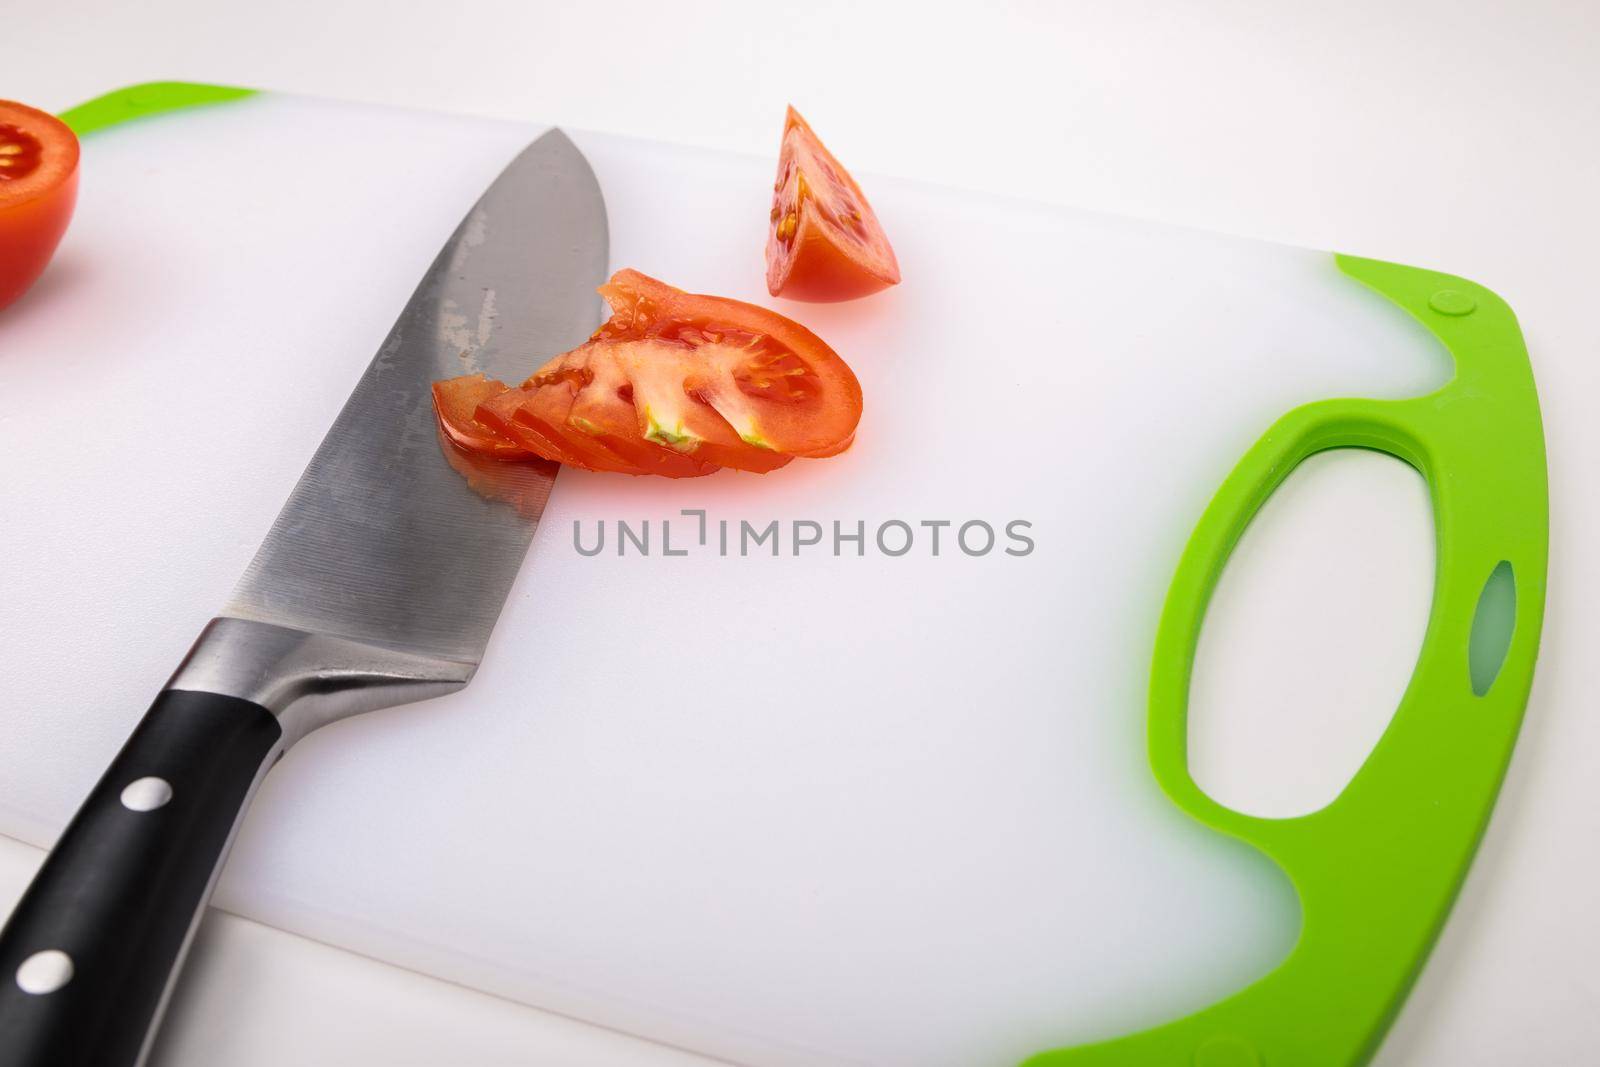 On a cutting board is a fresh red cut tomato and a large chef's knife. On an isolated white background.